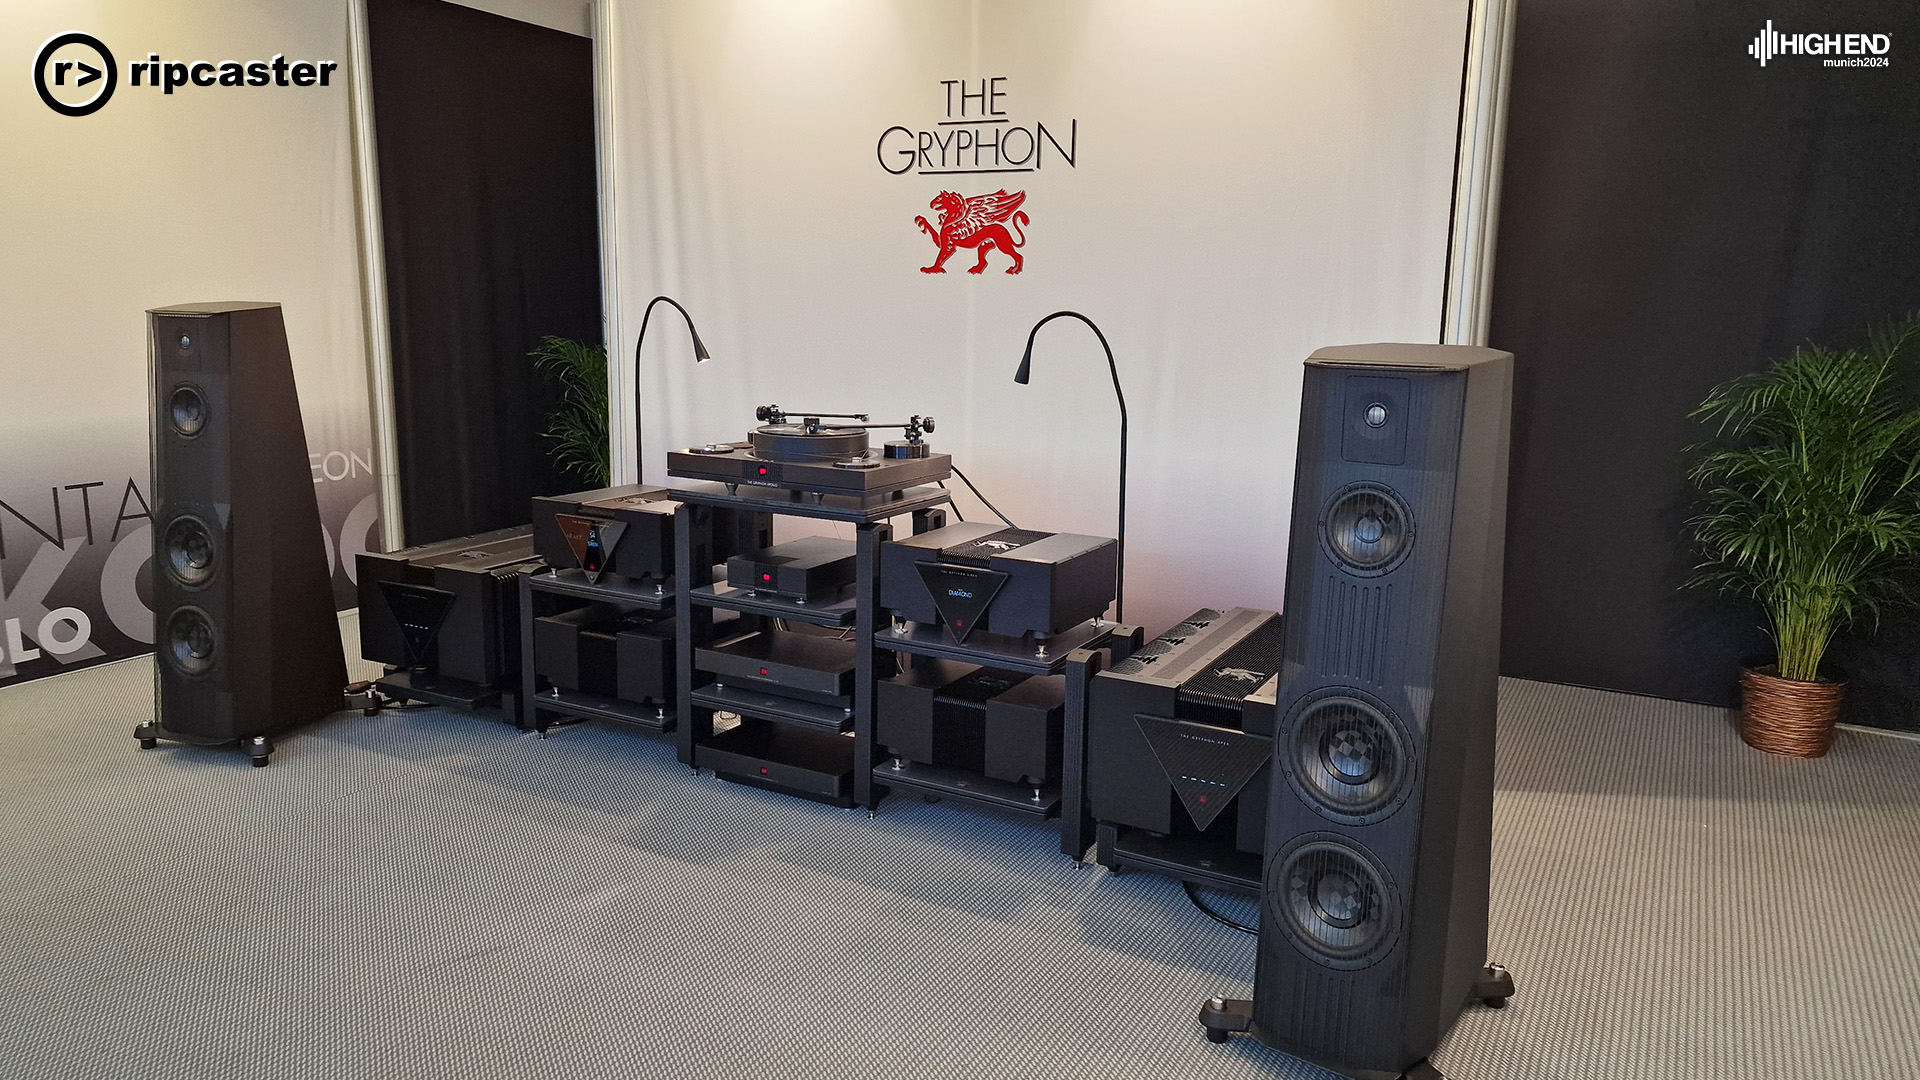 The Gryphon.  A pair of black floorstanding speakers either side of various pieces of HiFi equipment.